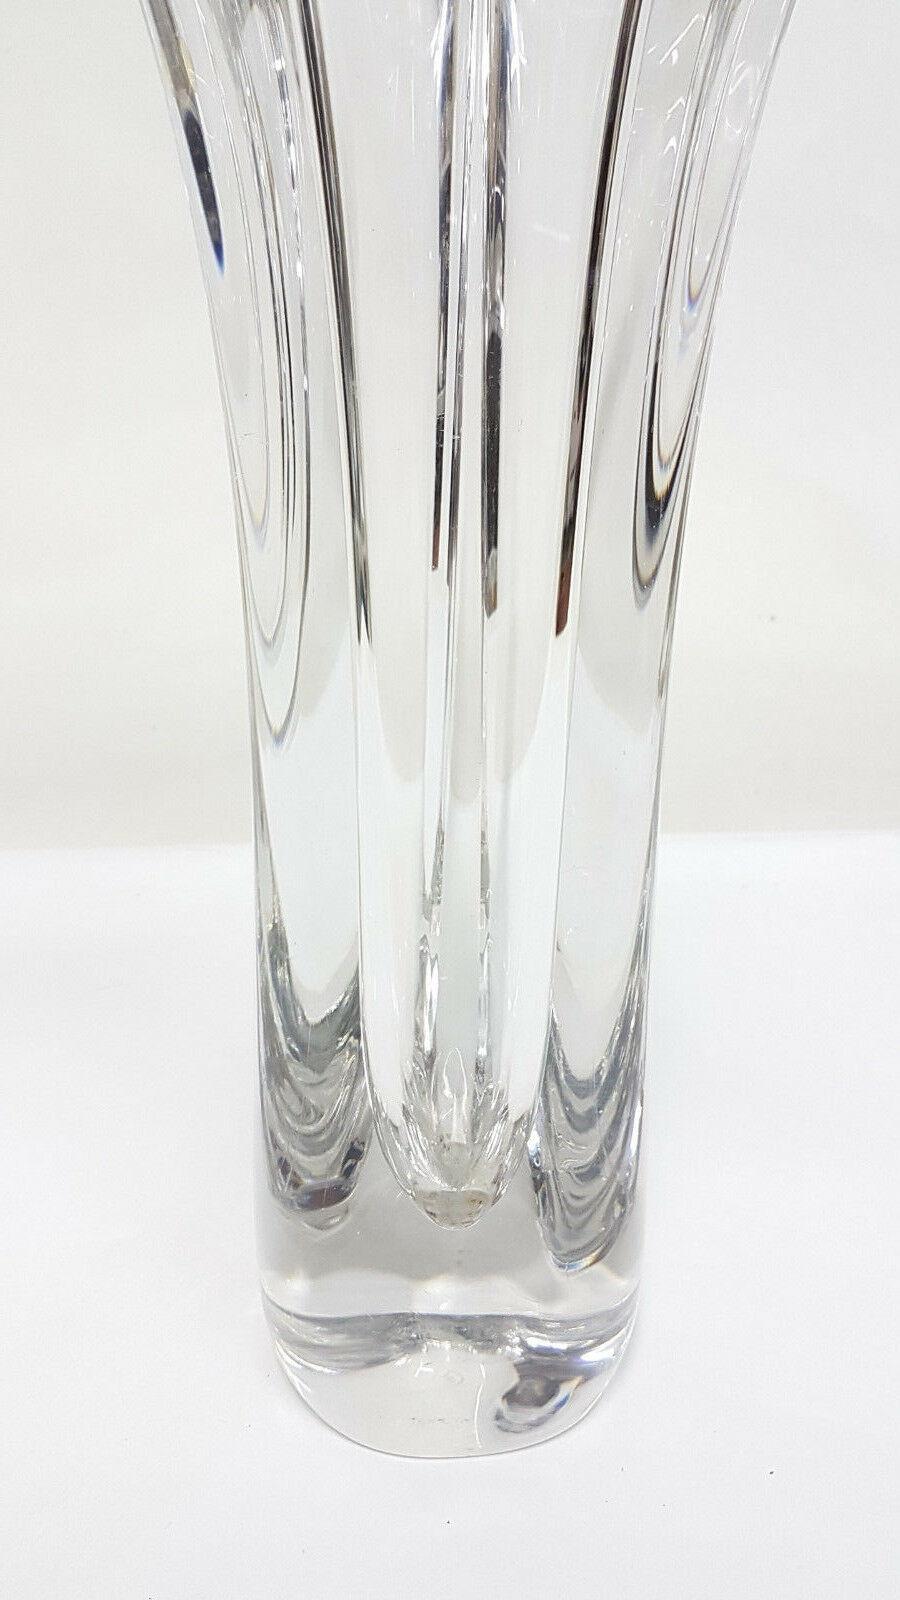 Late 20th Century Large Crystal Vase Designed by Umberto Clanetti for Vilca, 1970s